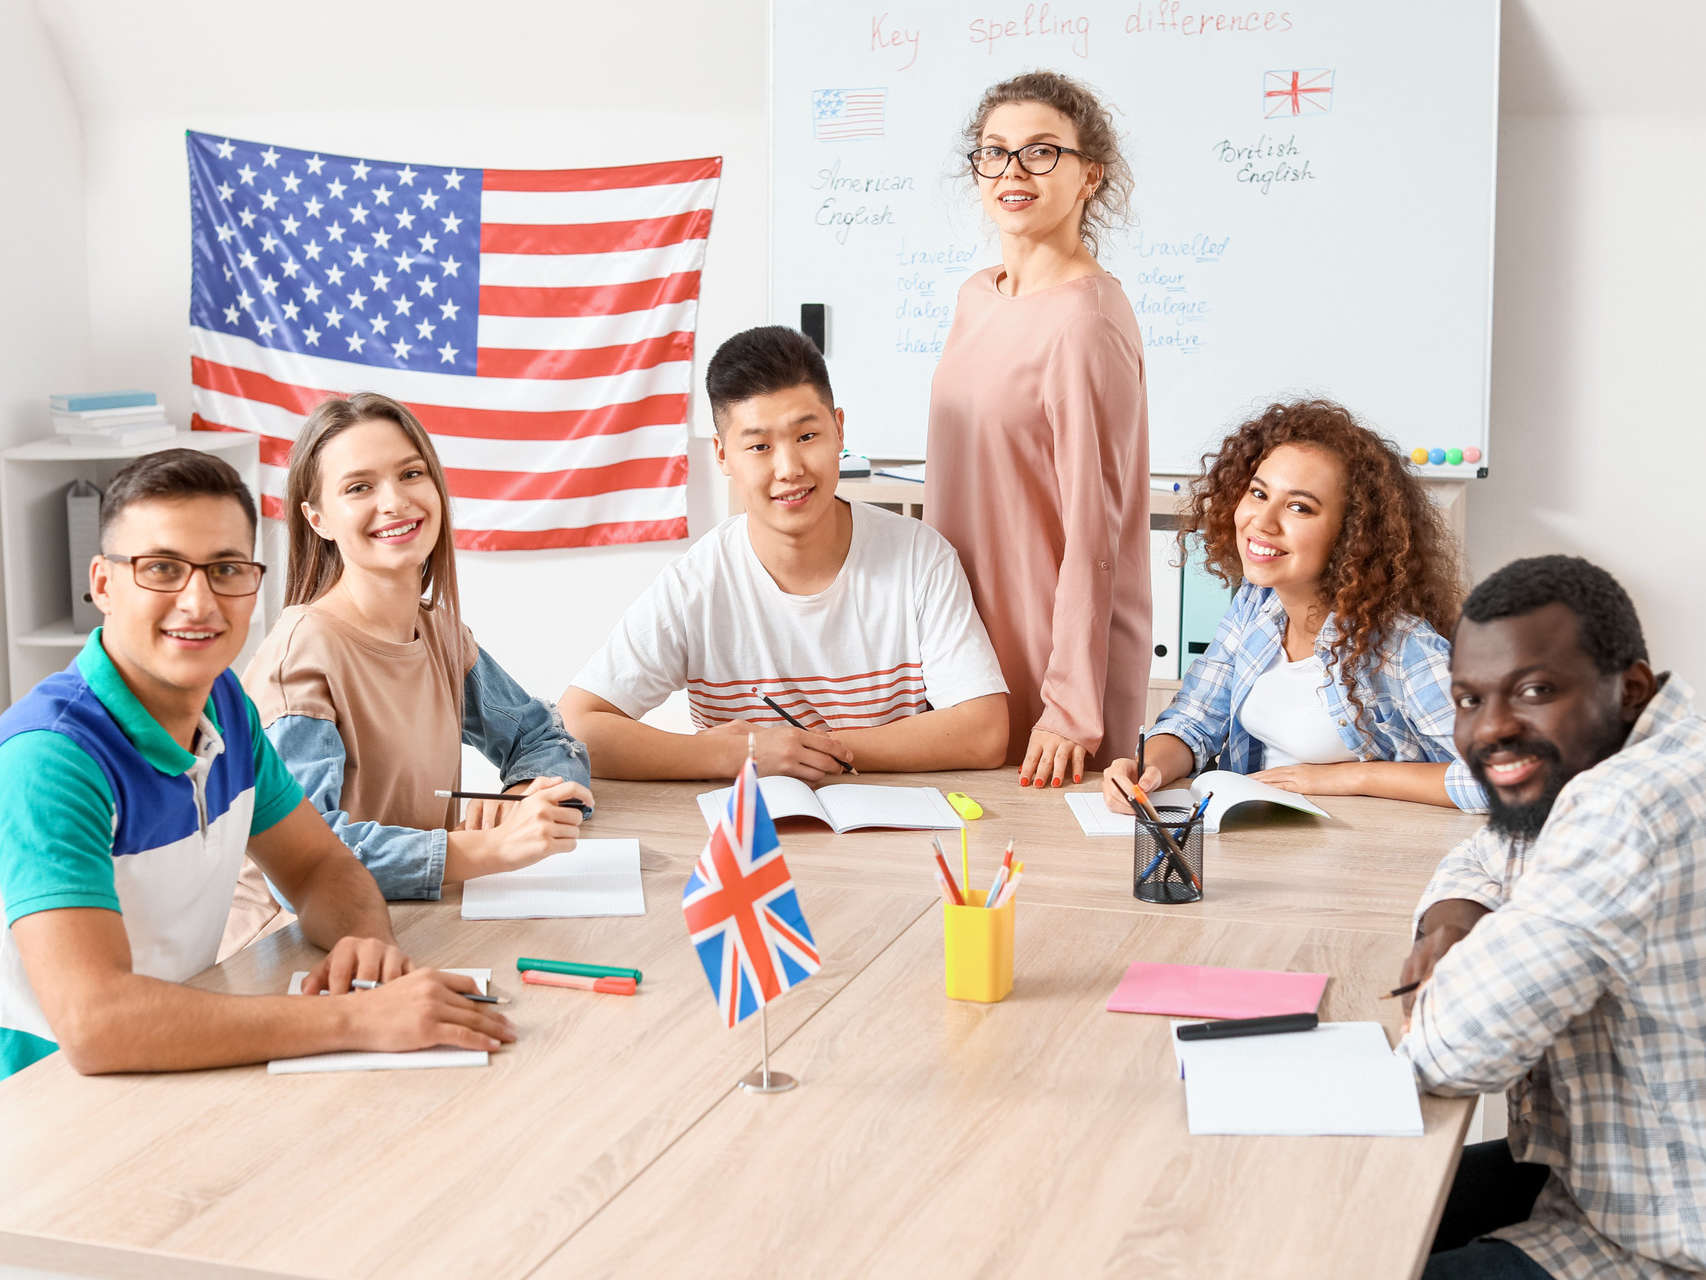 Students of various ethnic backgrounds sit around a table in front of an American flag